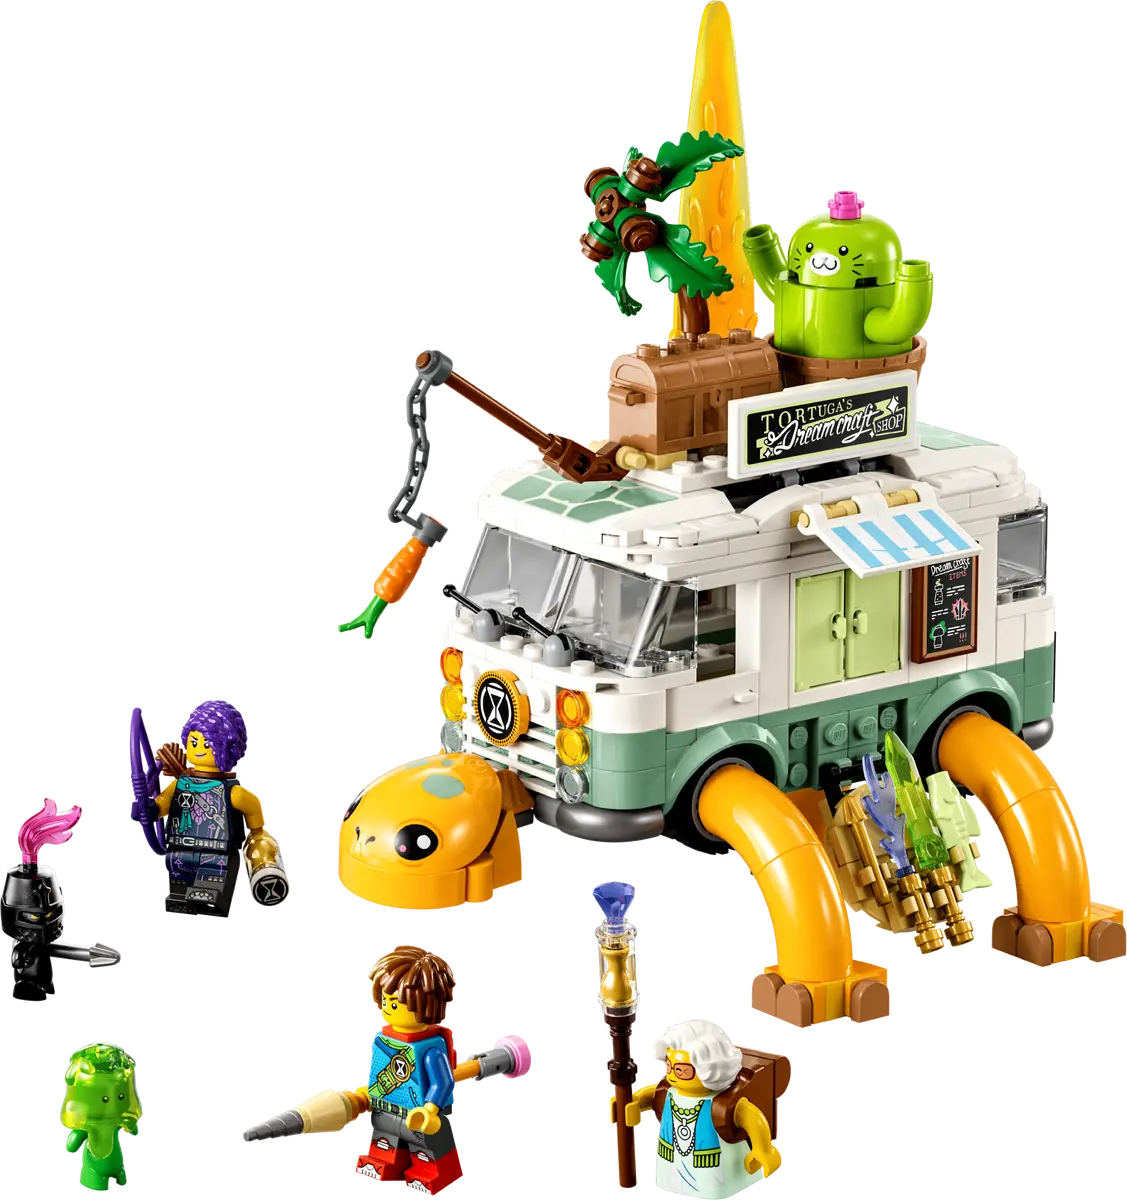 A group of lego toys

Description automatically generated